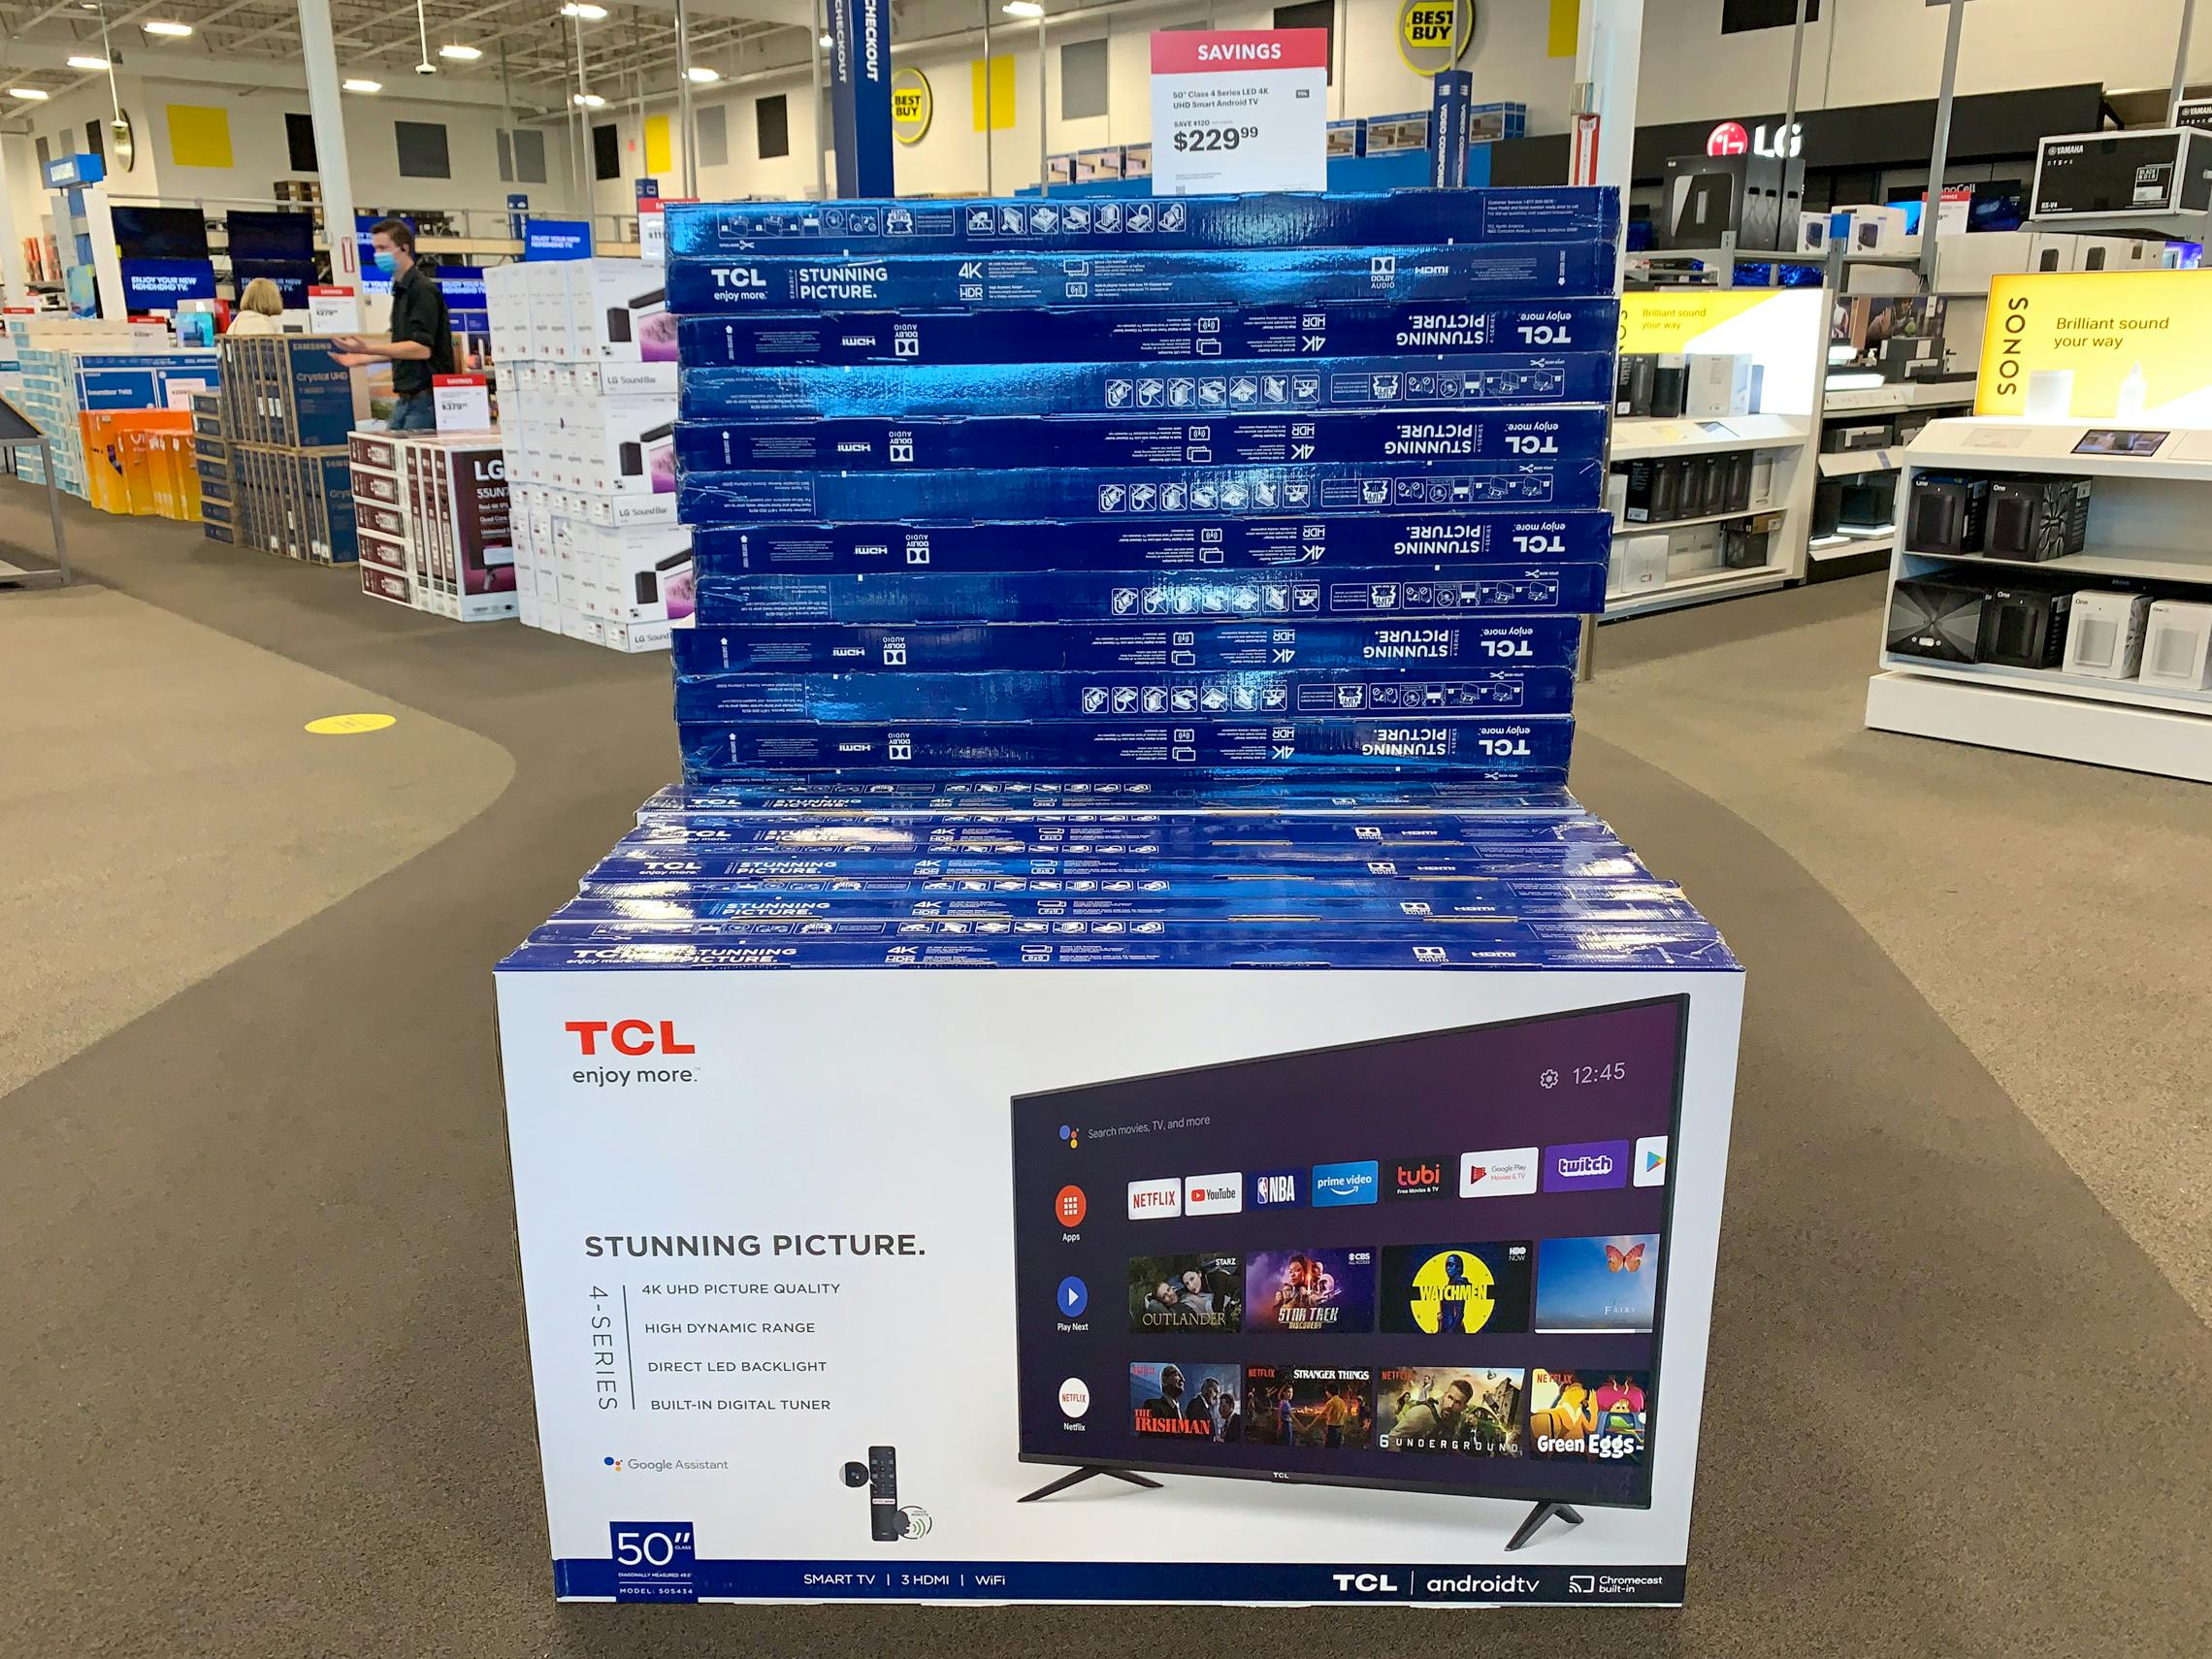 50-inch TCL TVs stacked up in the Best Buy store on sale for $229